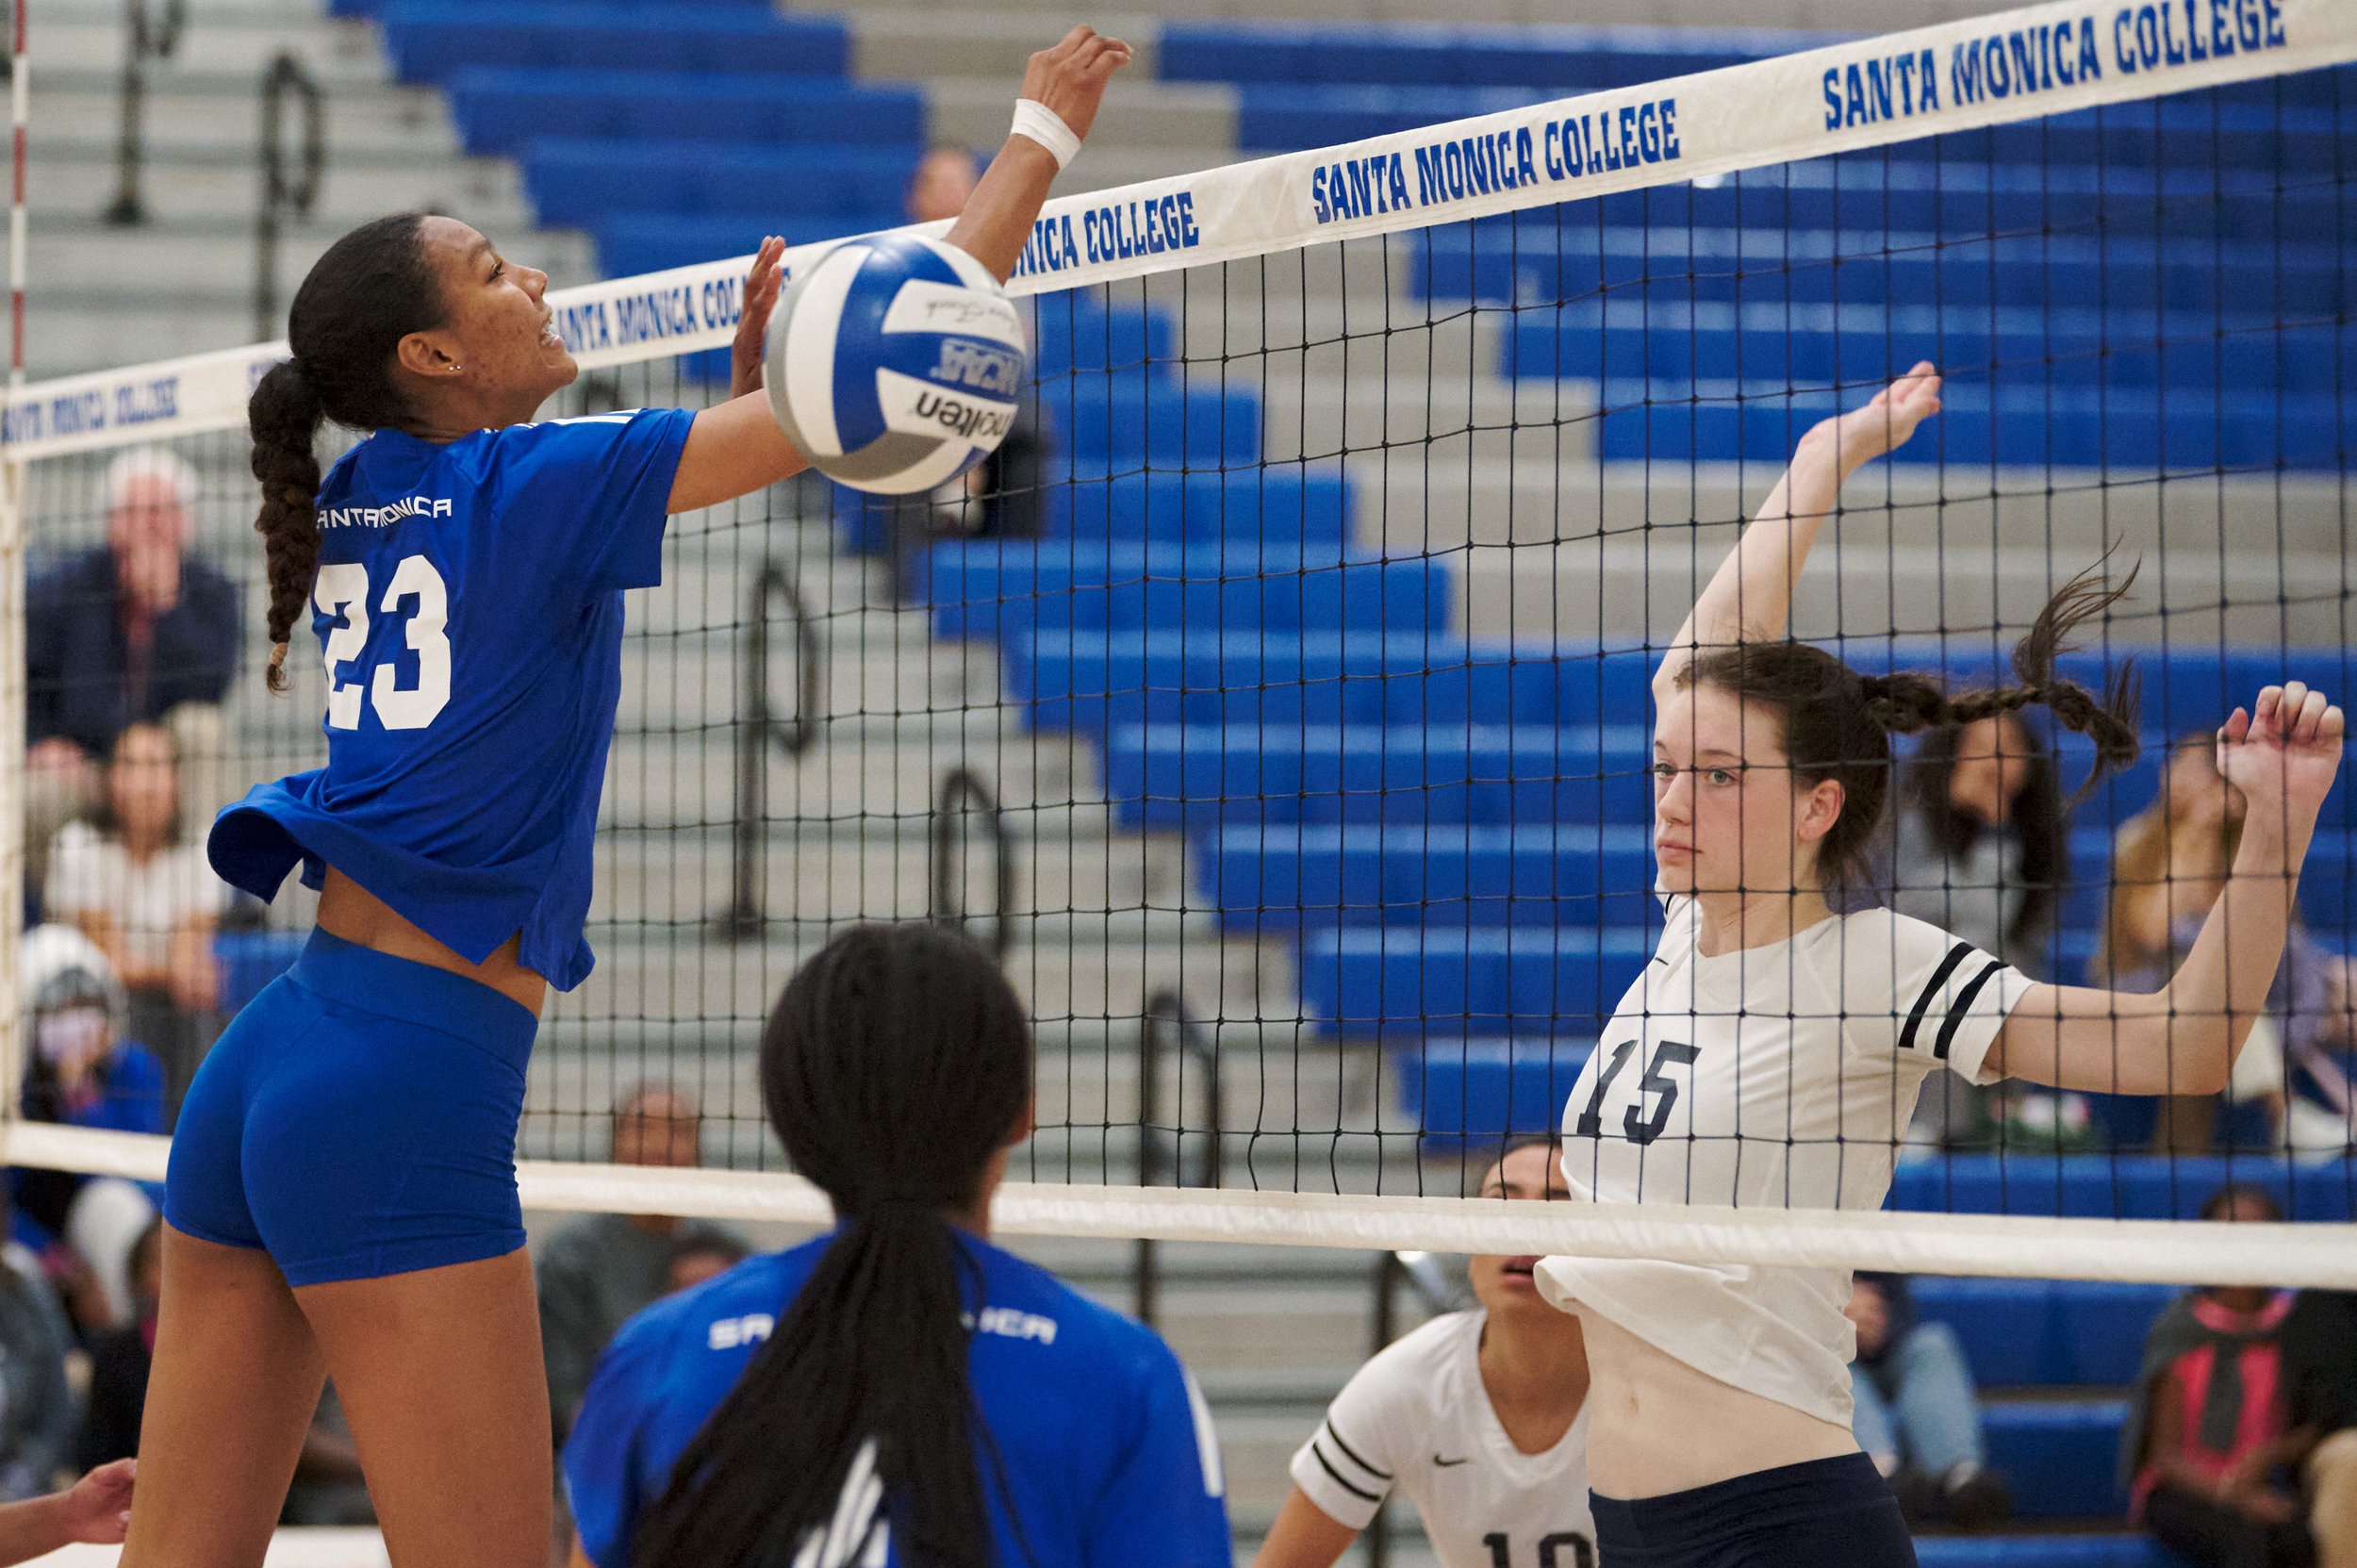  College of the Canyons Cougars' Aly Grodell (right) hits the ball past Santa Monica College Corsairs' Rain Martinez (left) during the women's volleyball match on Friday, Oct. 28, 2022, at SMC Gym in Santa Monica, Calif. The Corsairs lost 1-3. (Nicho